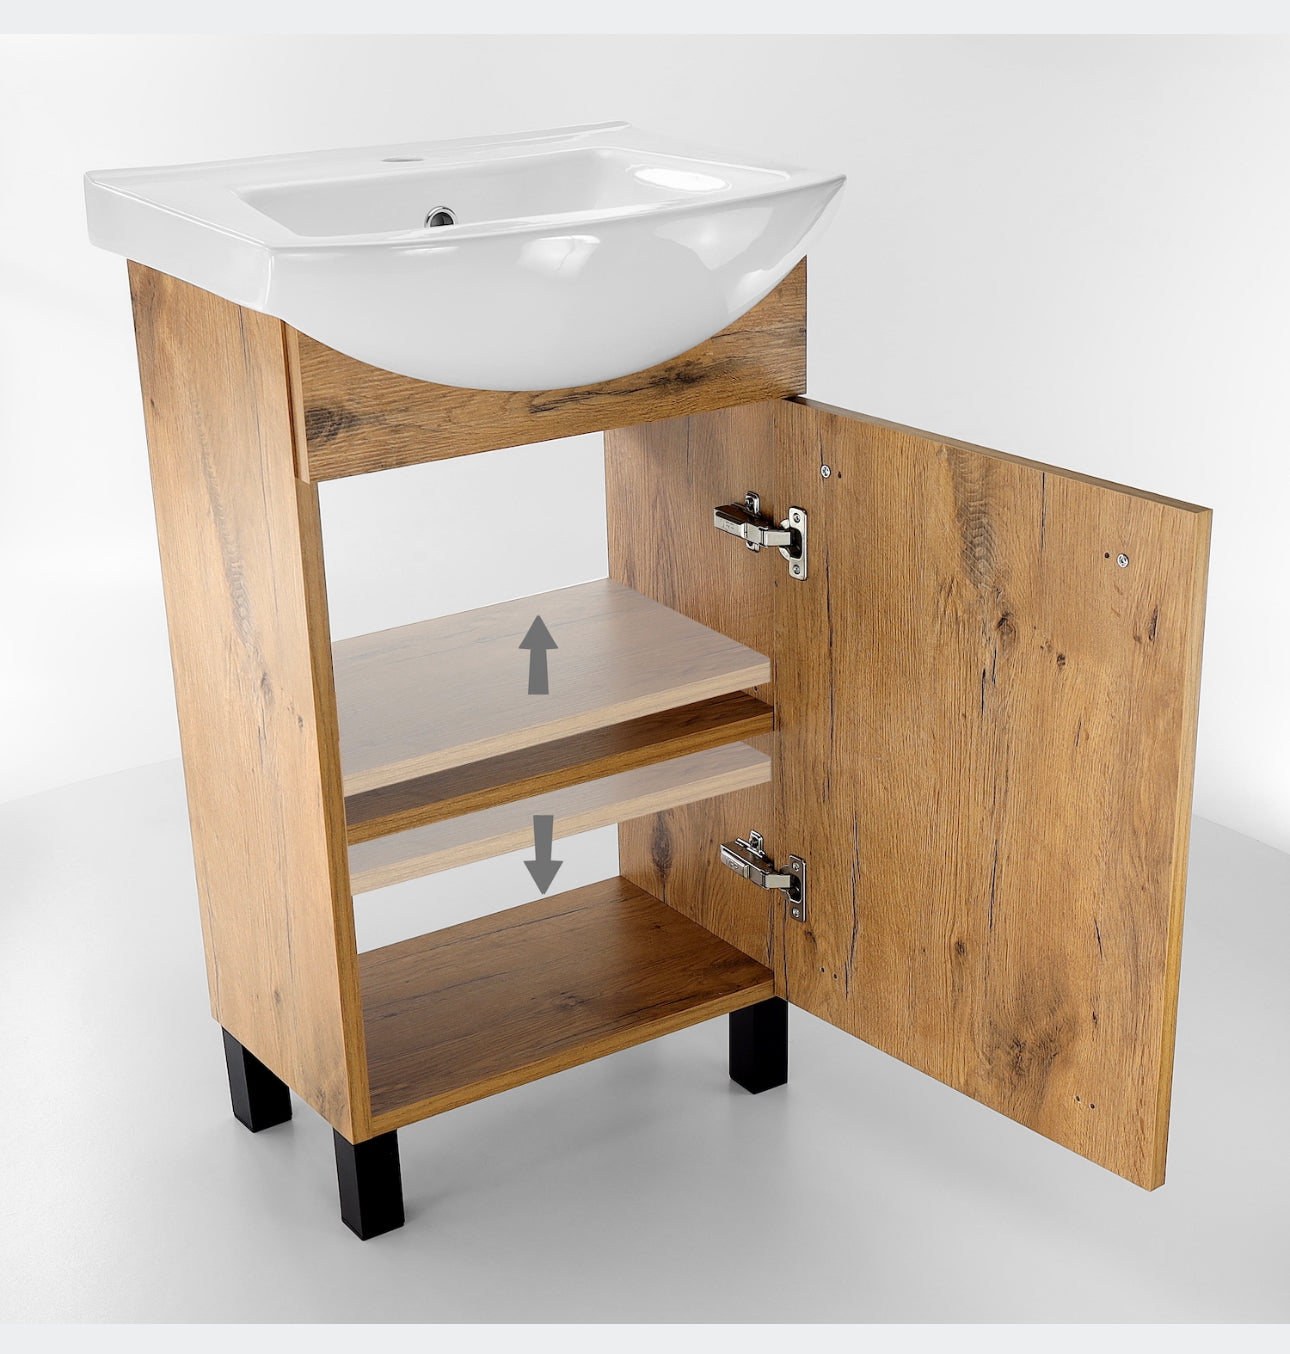 A solid bathroom cabinet with a 50cm washbasin